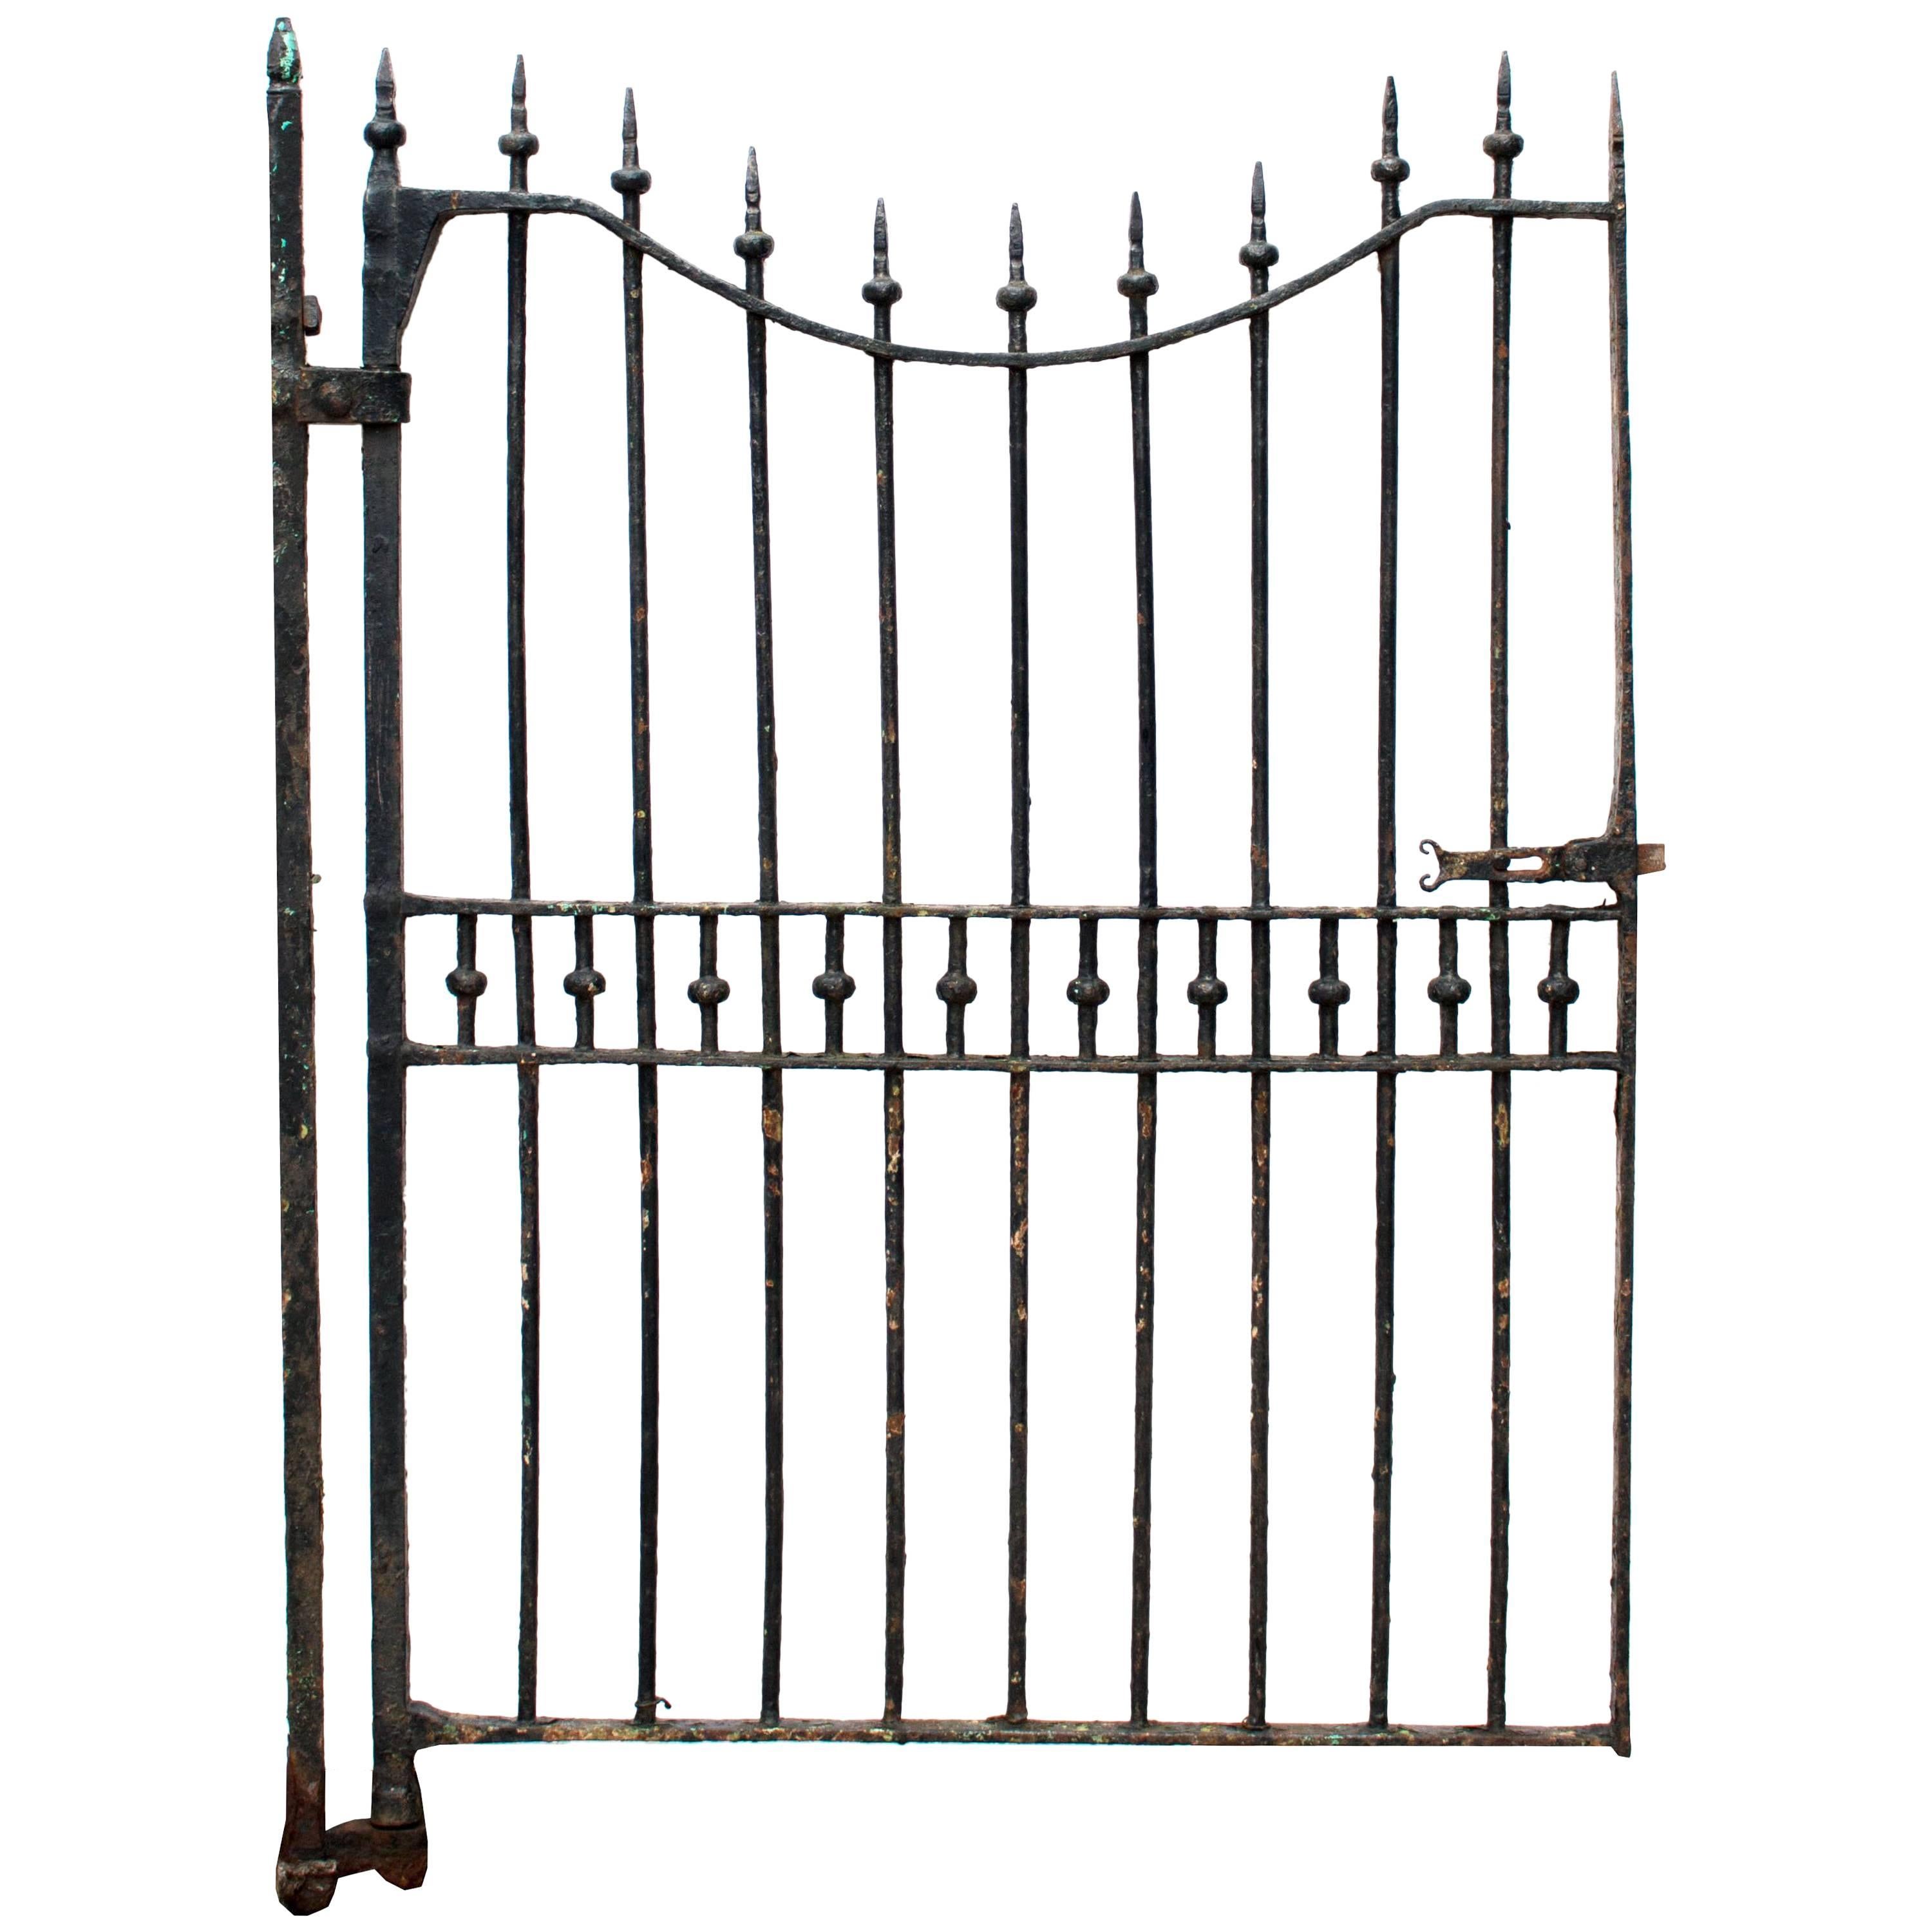 Reclaimed Late 19th Century Wrought Iron Pedestrian Gate